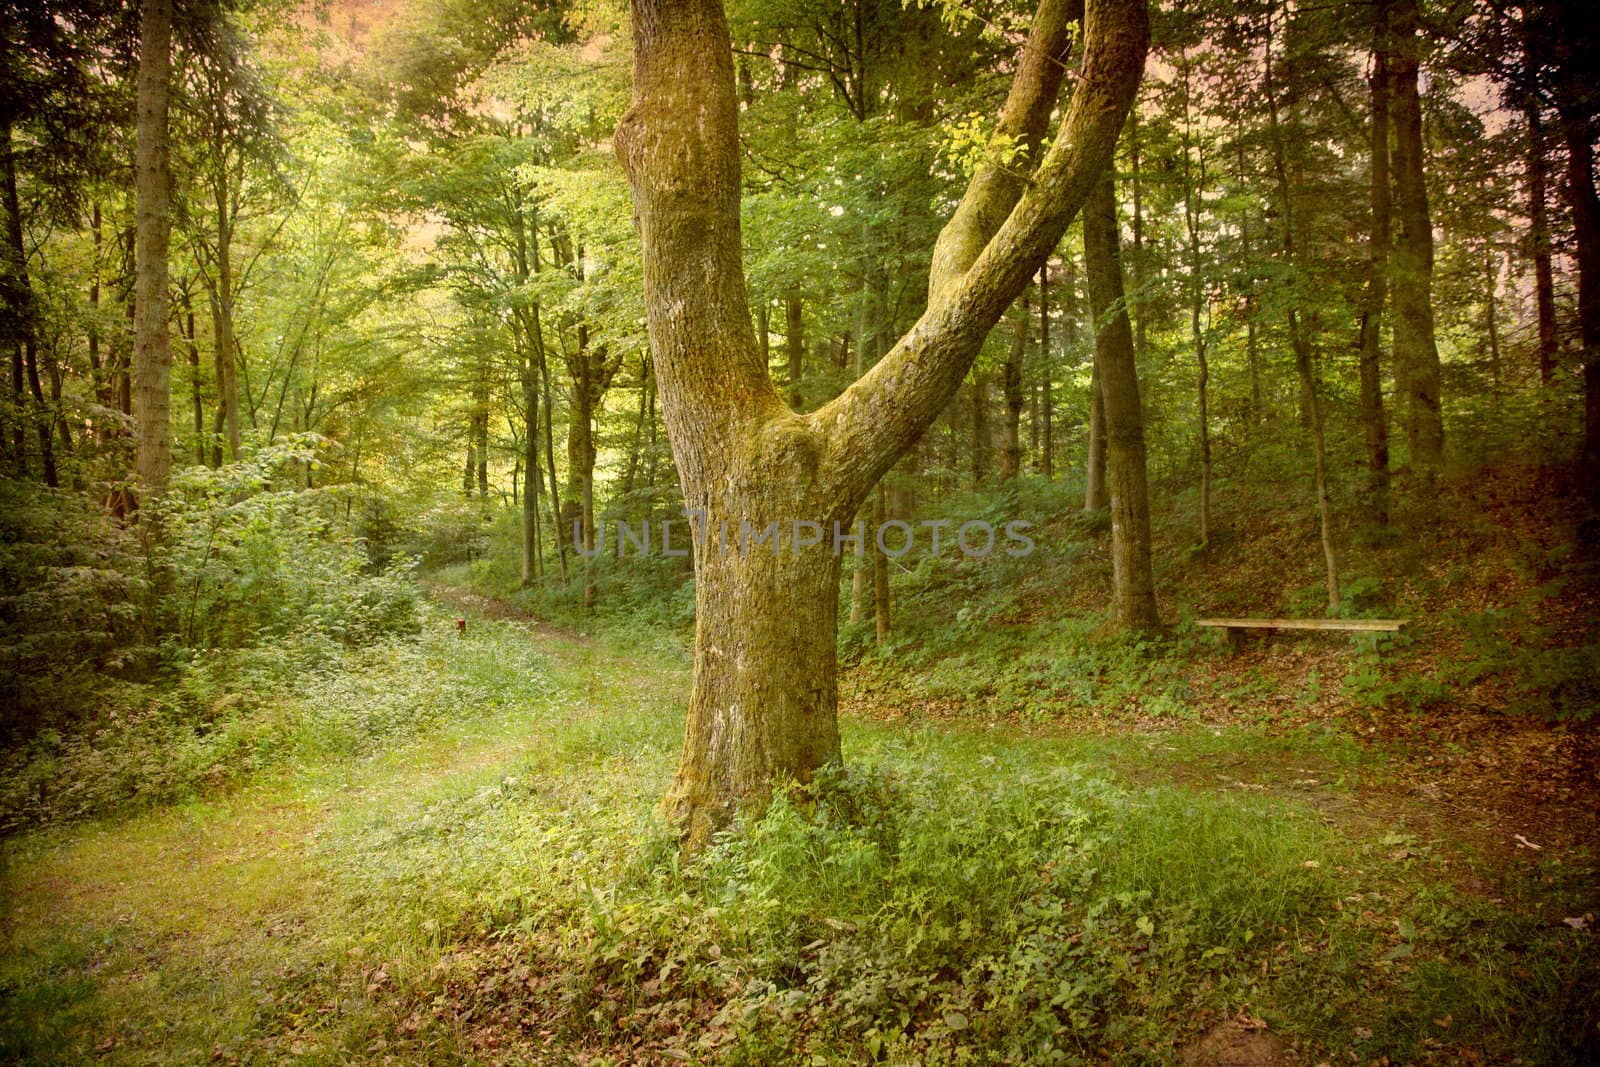 Artistic work of my own in retro style - Postcard from Denmark. - Lonely tree in the forest.